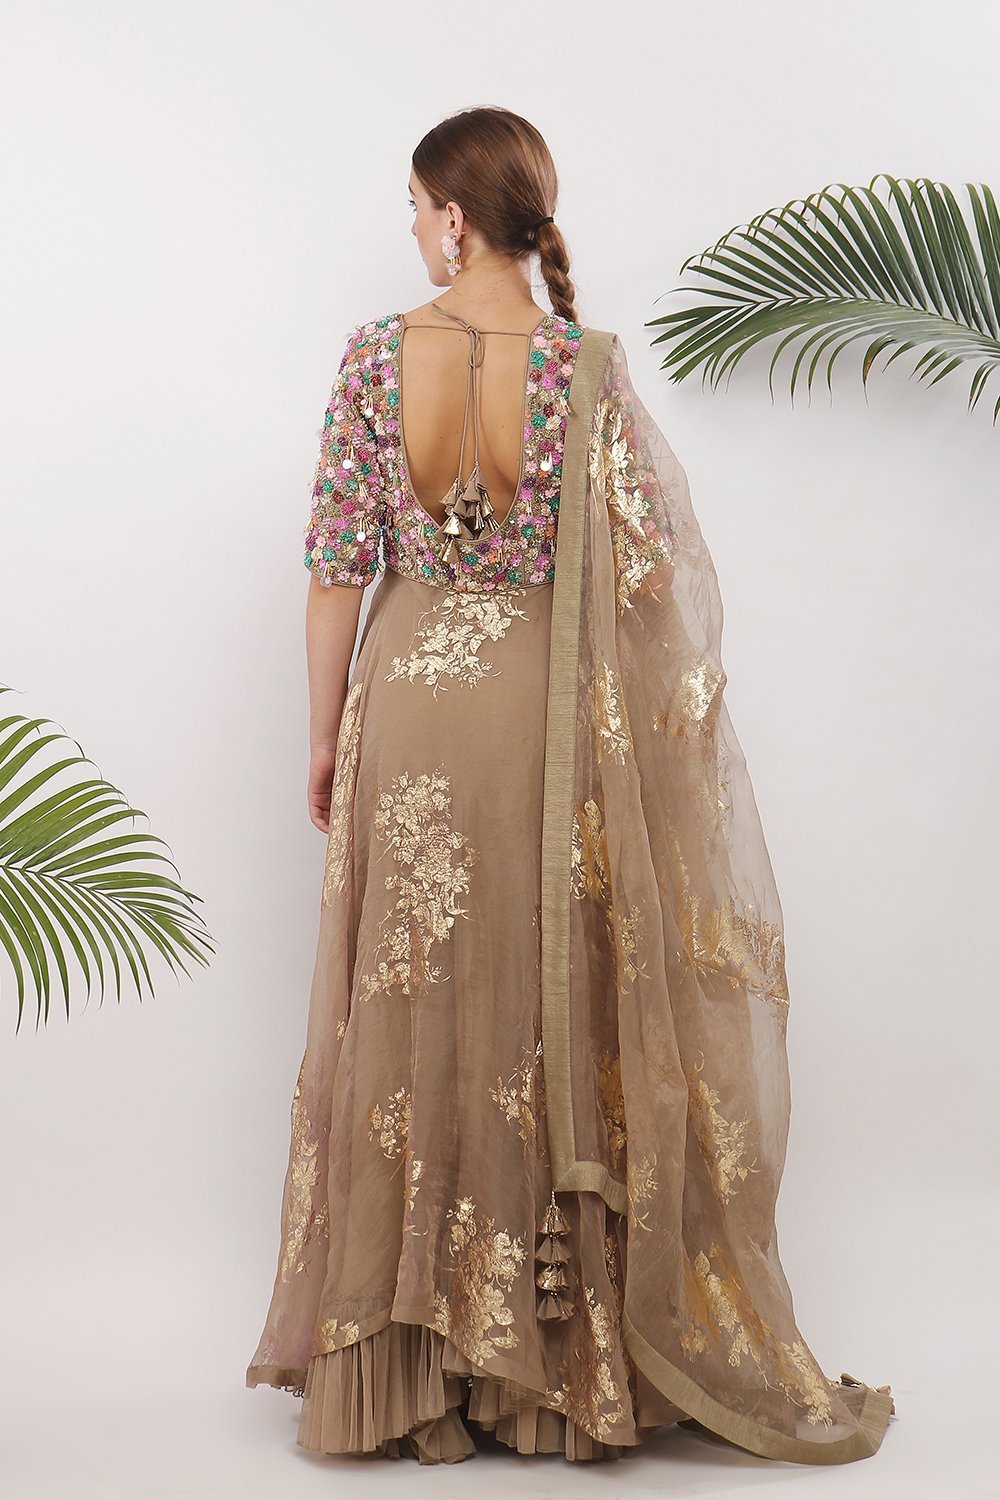 Embroidered yoke and gold printed ghera with dupatta and churidaar